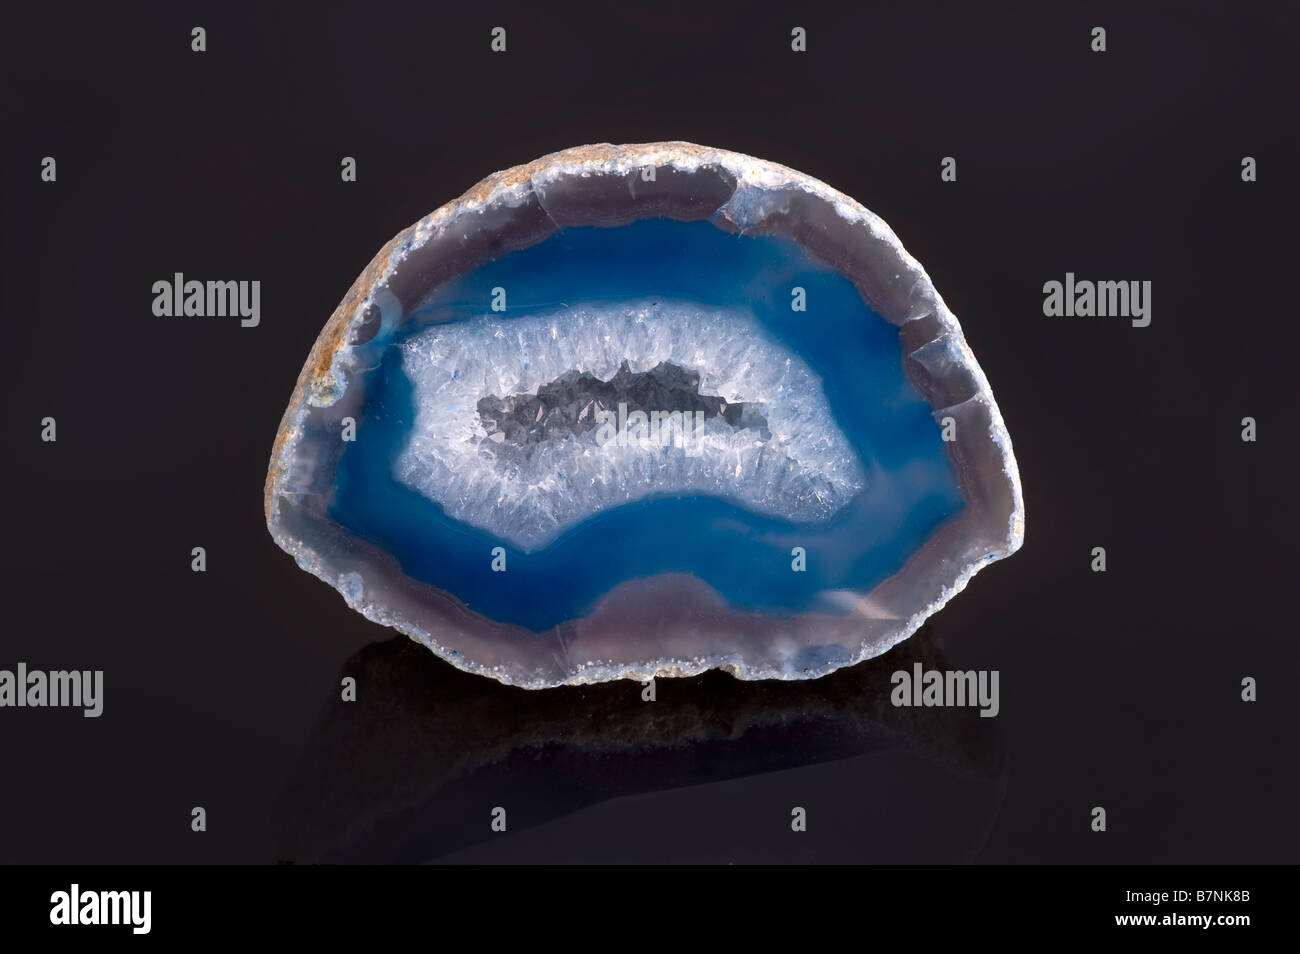 Agate geode, blue, large, on black background Stock Photo